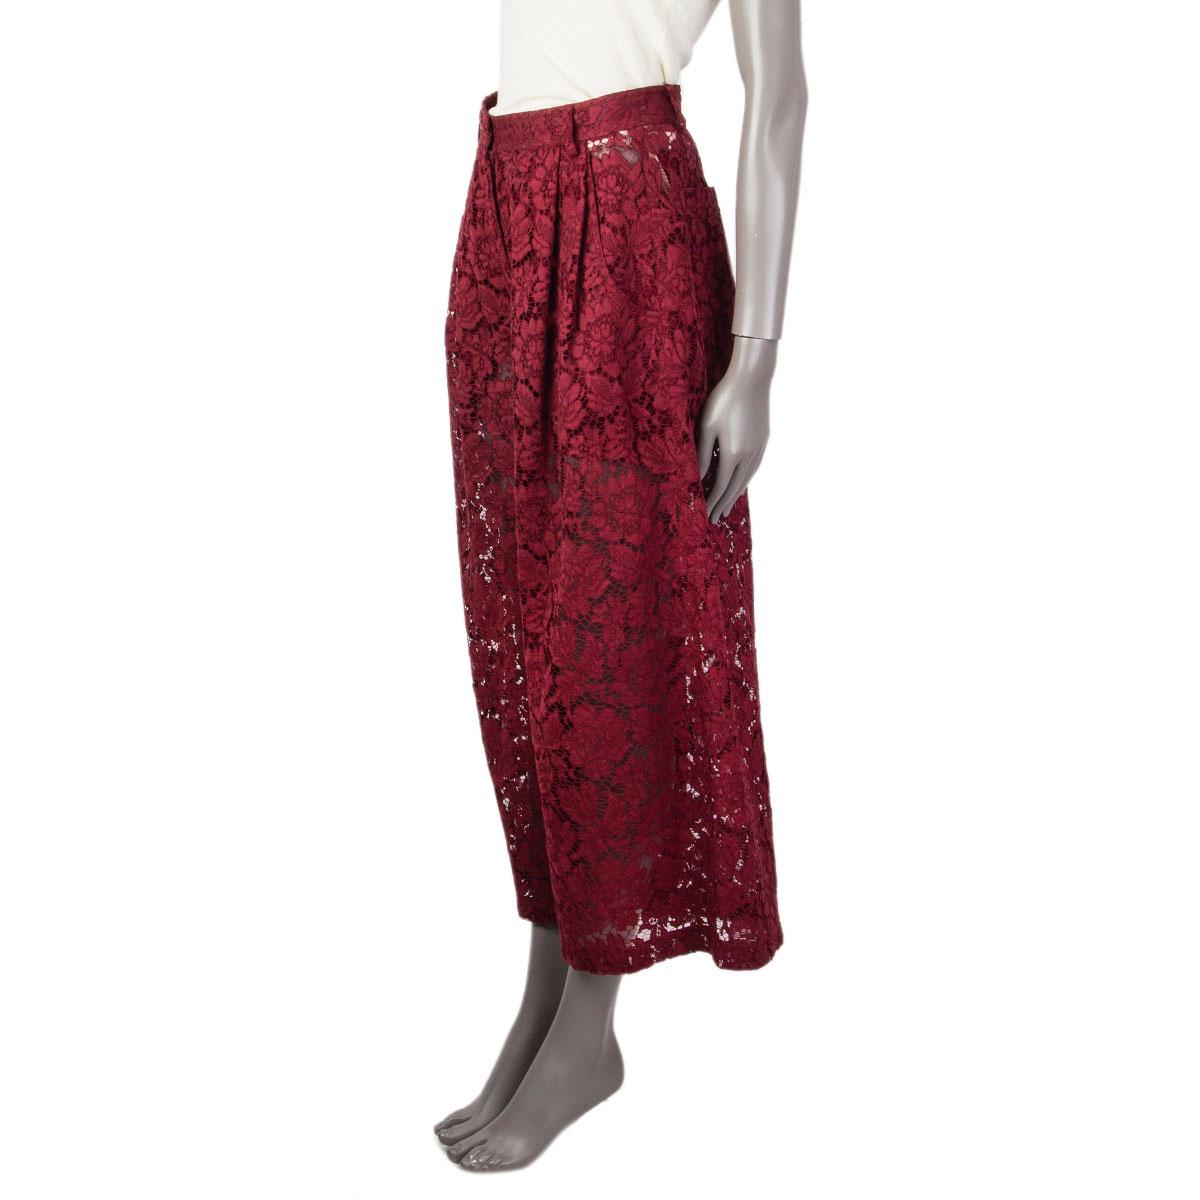 100% authentic Valentino Guipure lace trousers in burgundy missing tag (probably cotton) with wide legs, a pleated waist. high rise and slit pockets in the front. Closes with a hook and bar and zipper in the front. Lined with shorts in (probably